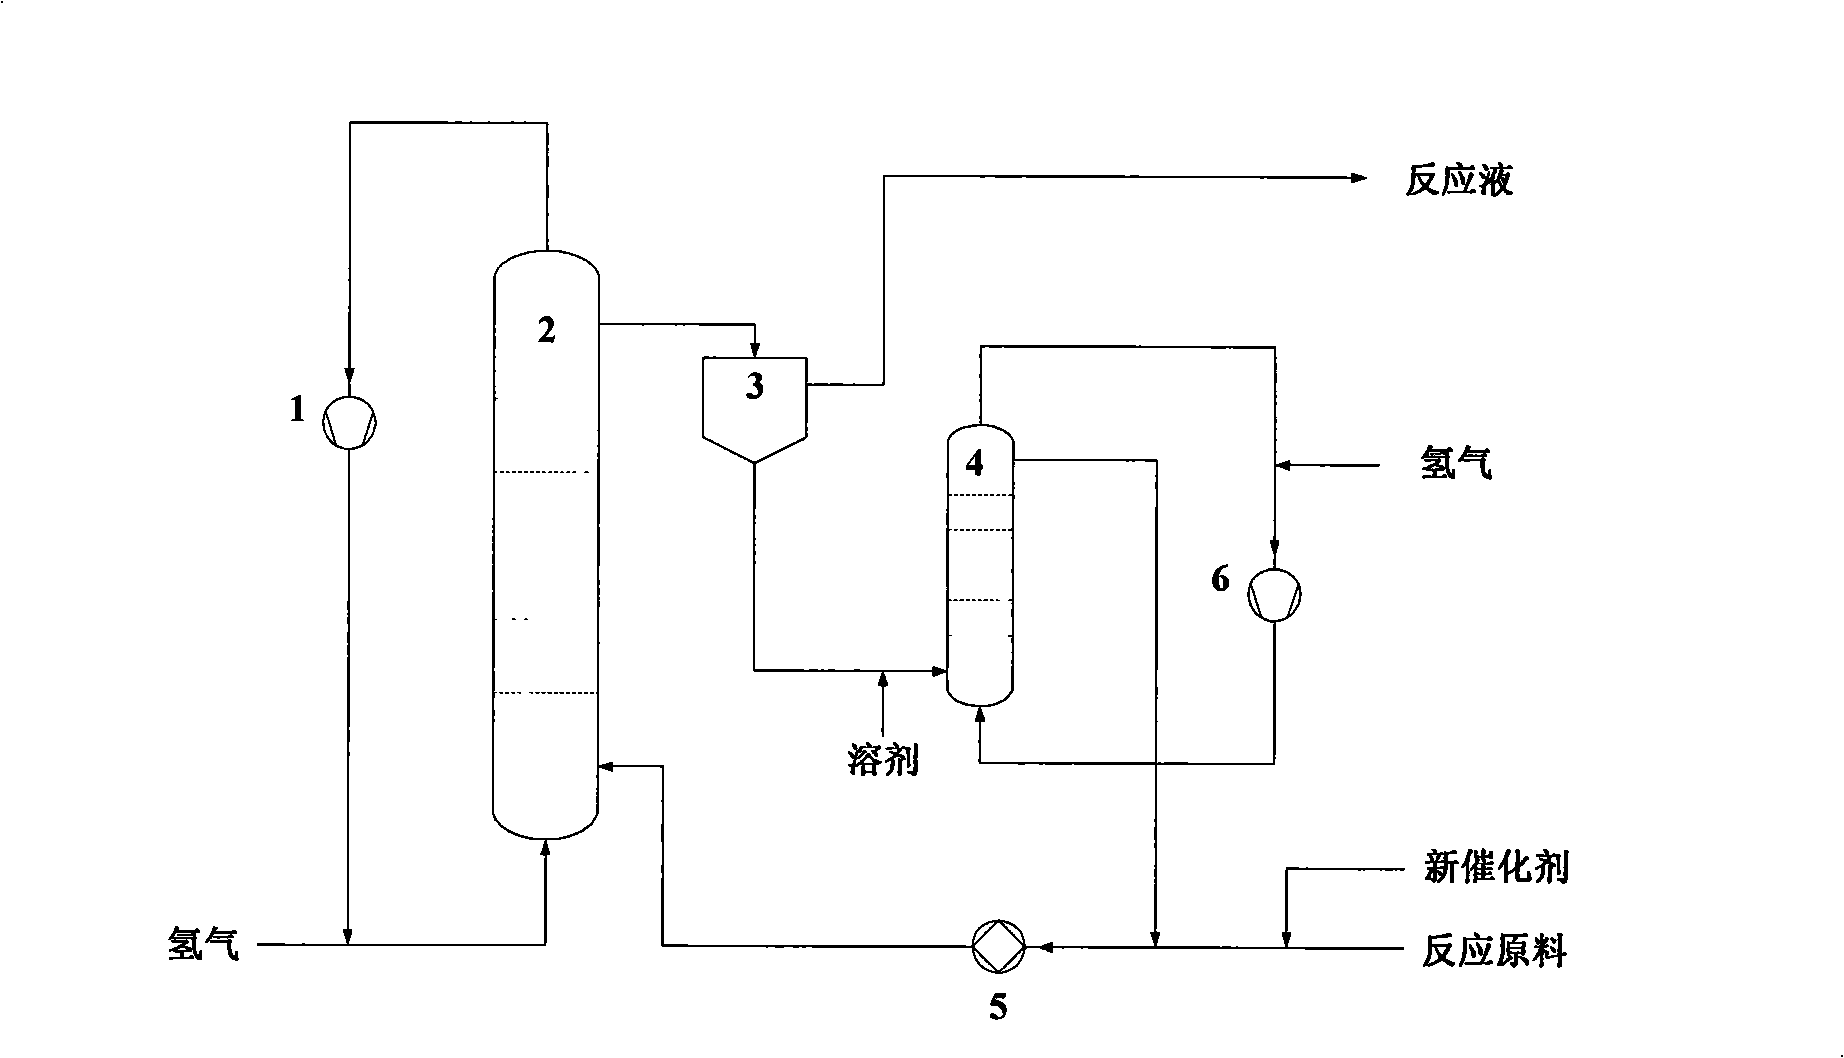 Process for preparation of meta-benzene dimethanamine by continuous hydrogenation reaction